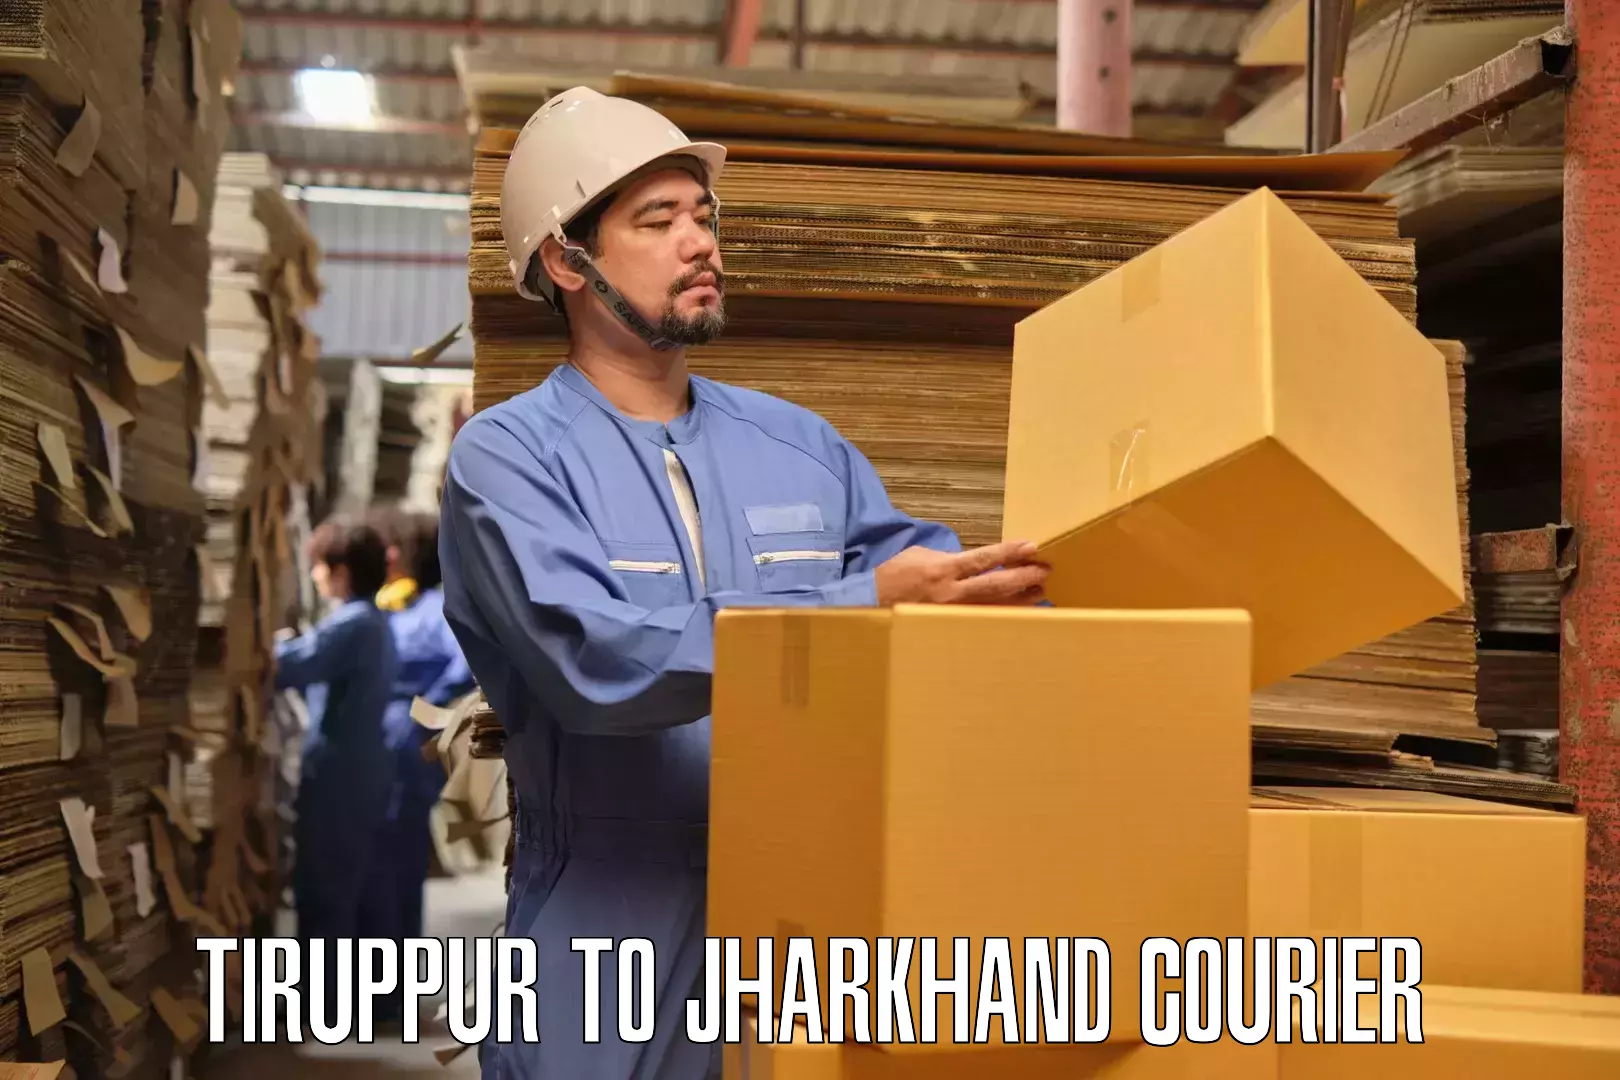 Furniture delivery service Tiruppur to Barkagaon